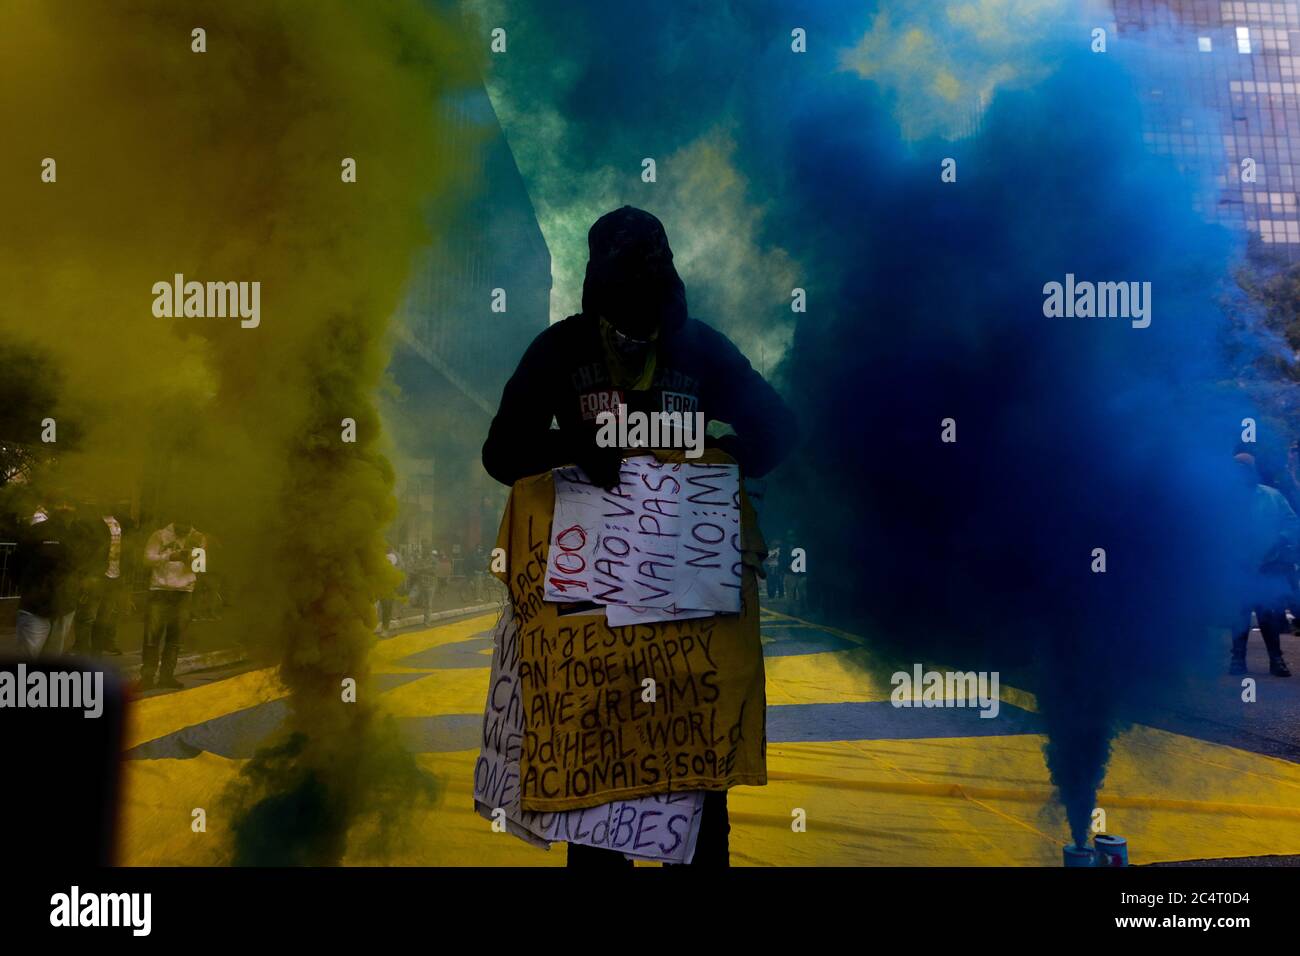 Sao Paulo, Brazil. 28th June, 2020. Leftist militants and football fans protested against the government of President Bolsonaro, against racism and for democracy on Sao Paulo Avenue. Protesters held banners and lit smoke signals amid speeches by militants who were accompanied by a large number of military police. Credit: Dario Oliveira/ZUMA Wire/Alamy Live News Stock Photo